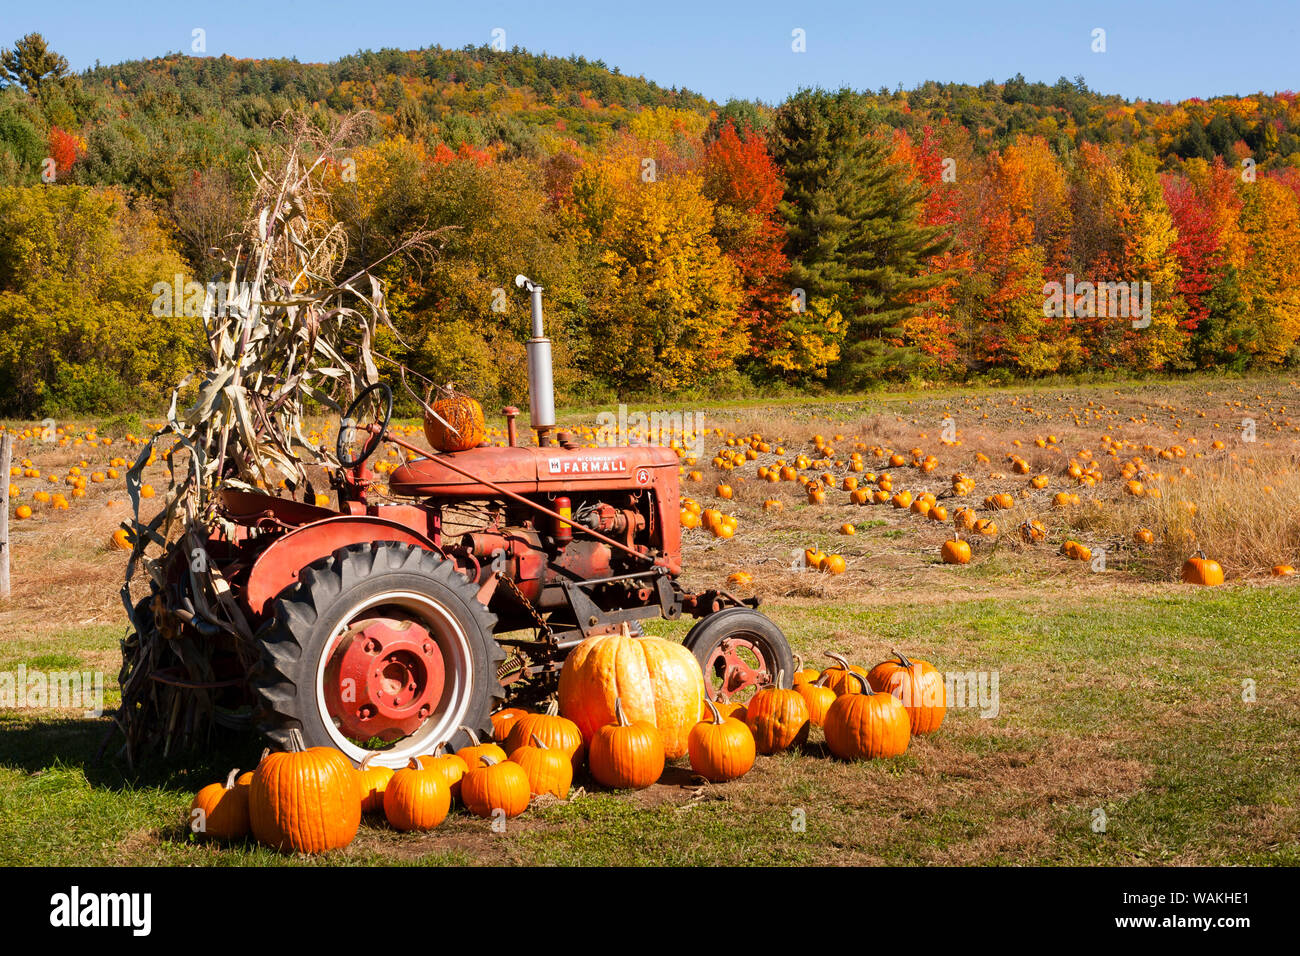 Pumpkins with tractor and autumn leaves in Vermont countryside, USA Stock Photo